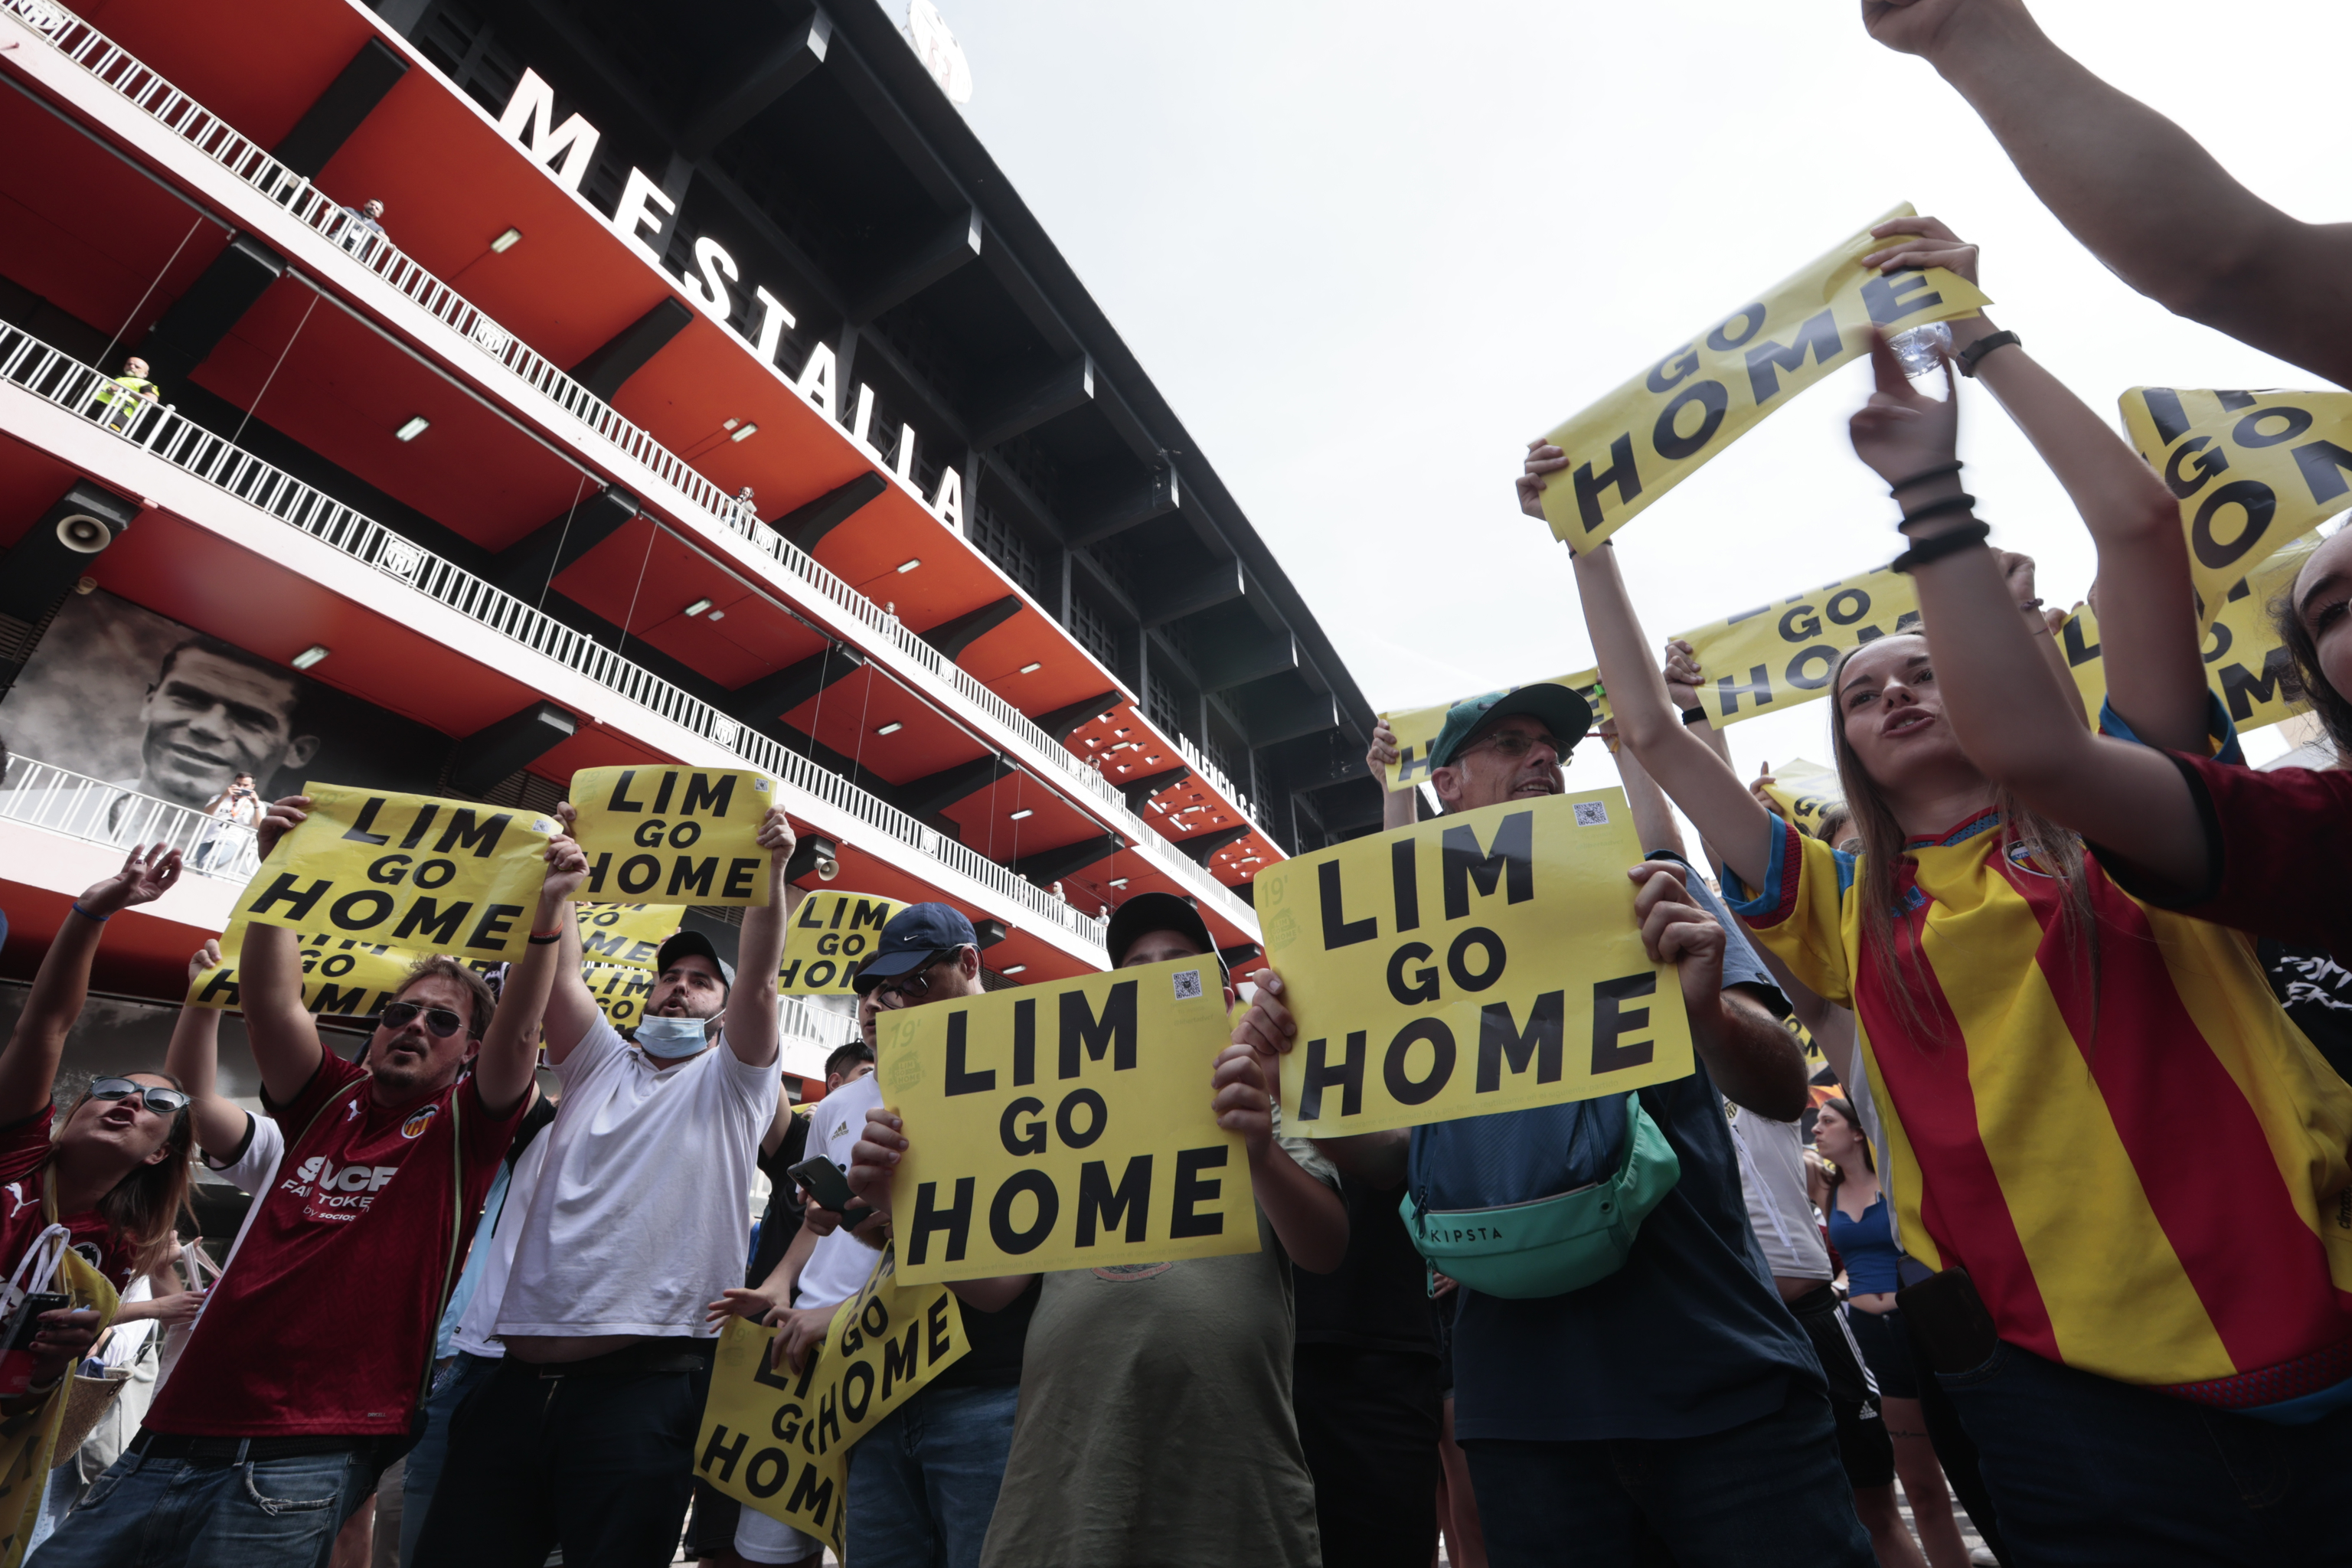 Valencia fans protest against Peter Lim outside Mestalla